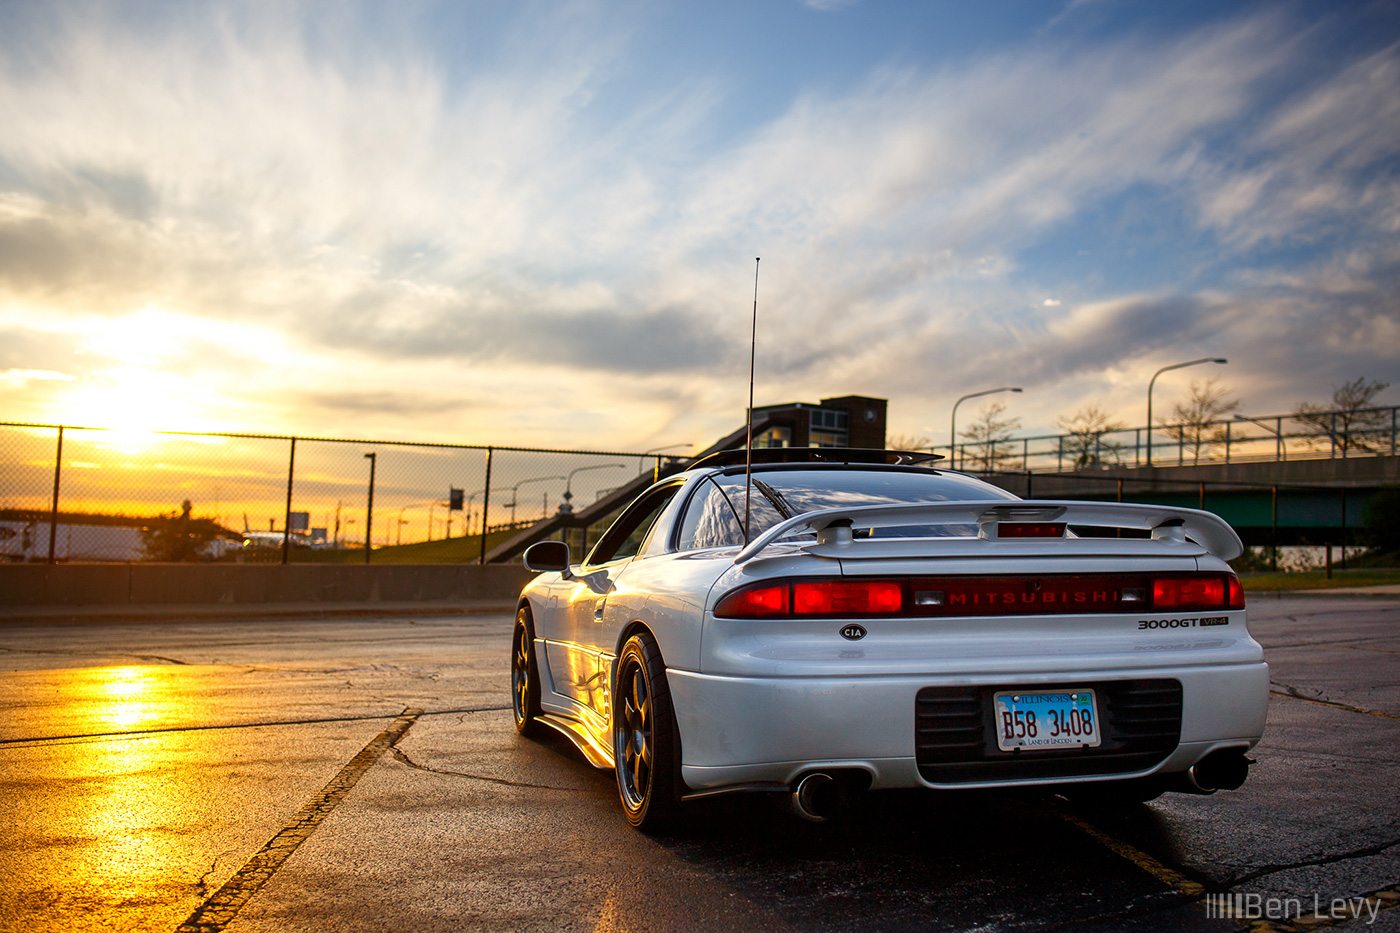 Rear of a 1G Mitsubishi 3000GT facing the Sunset